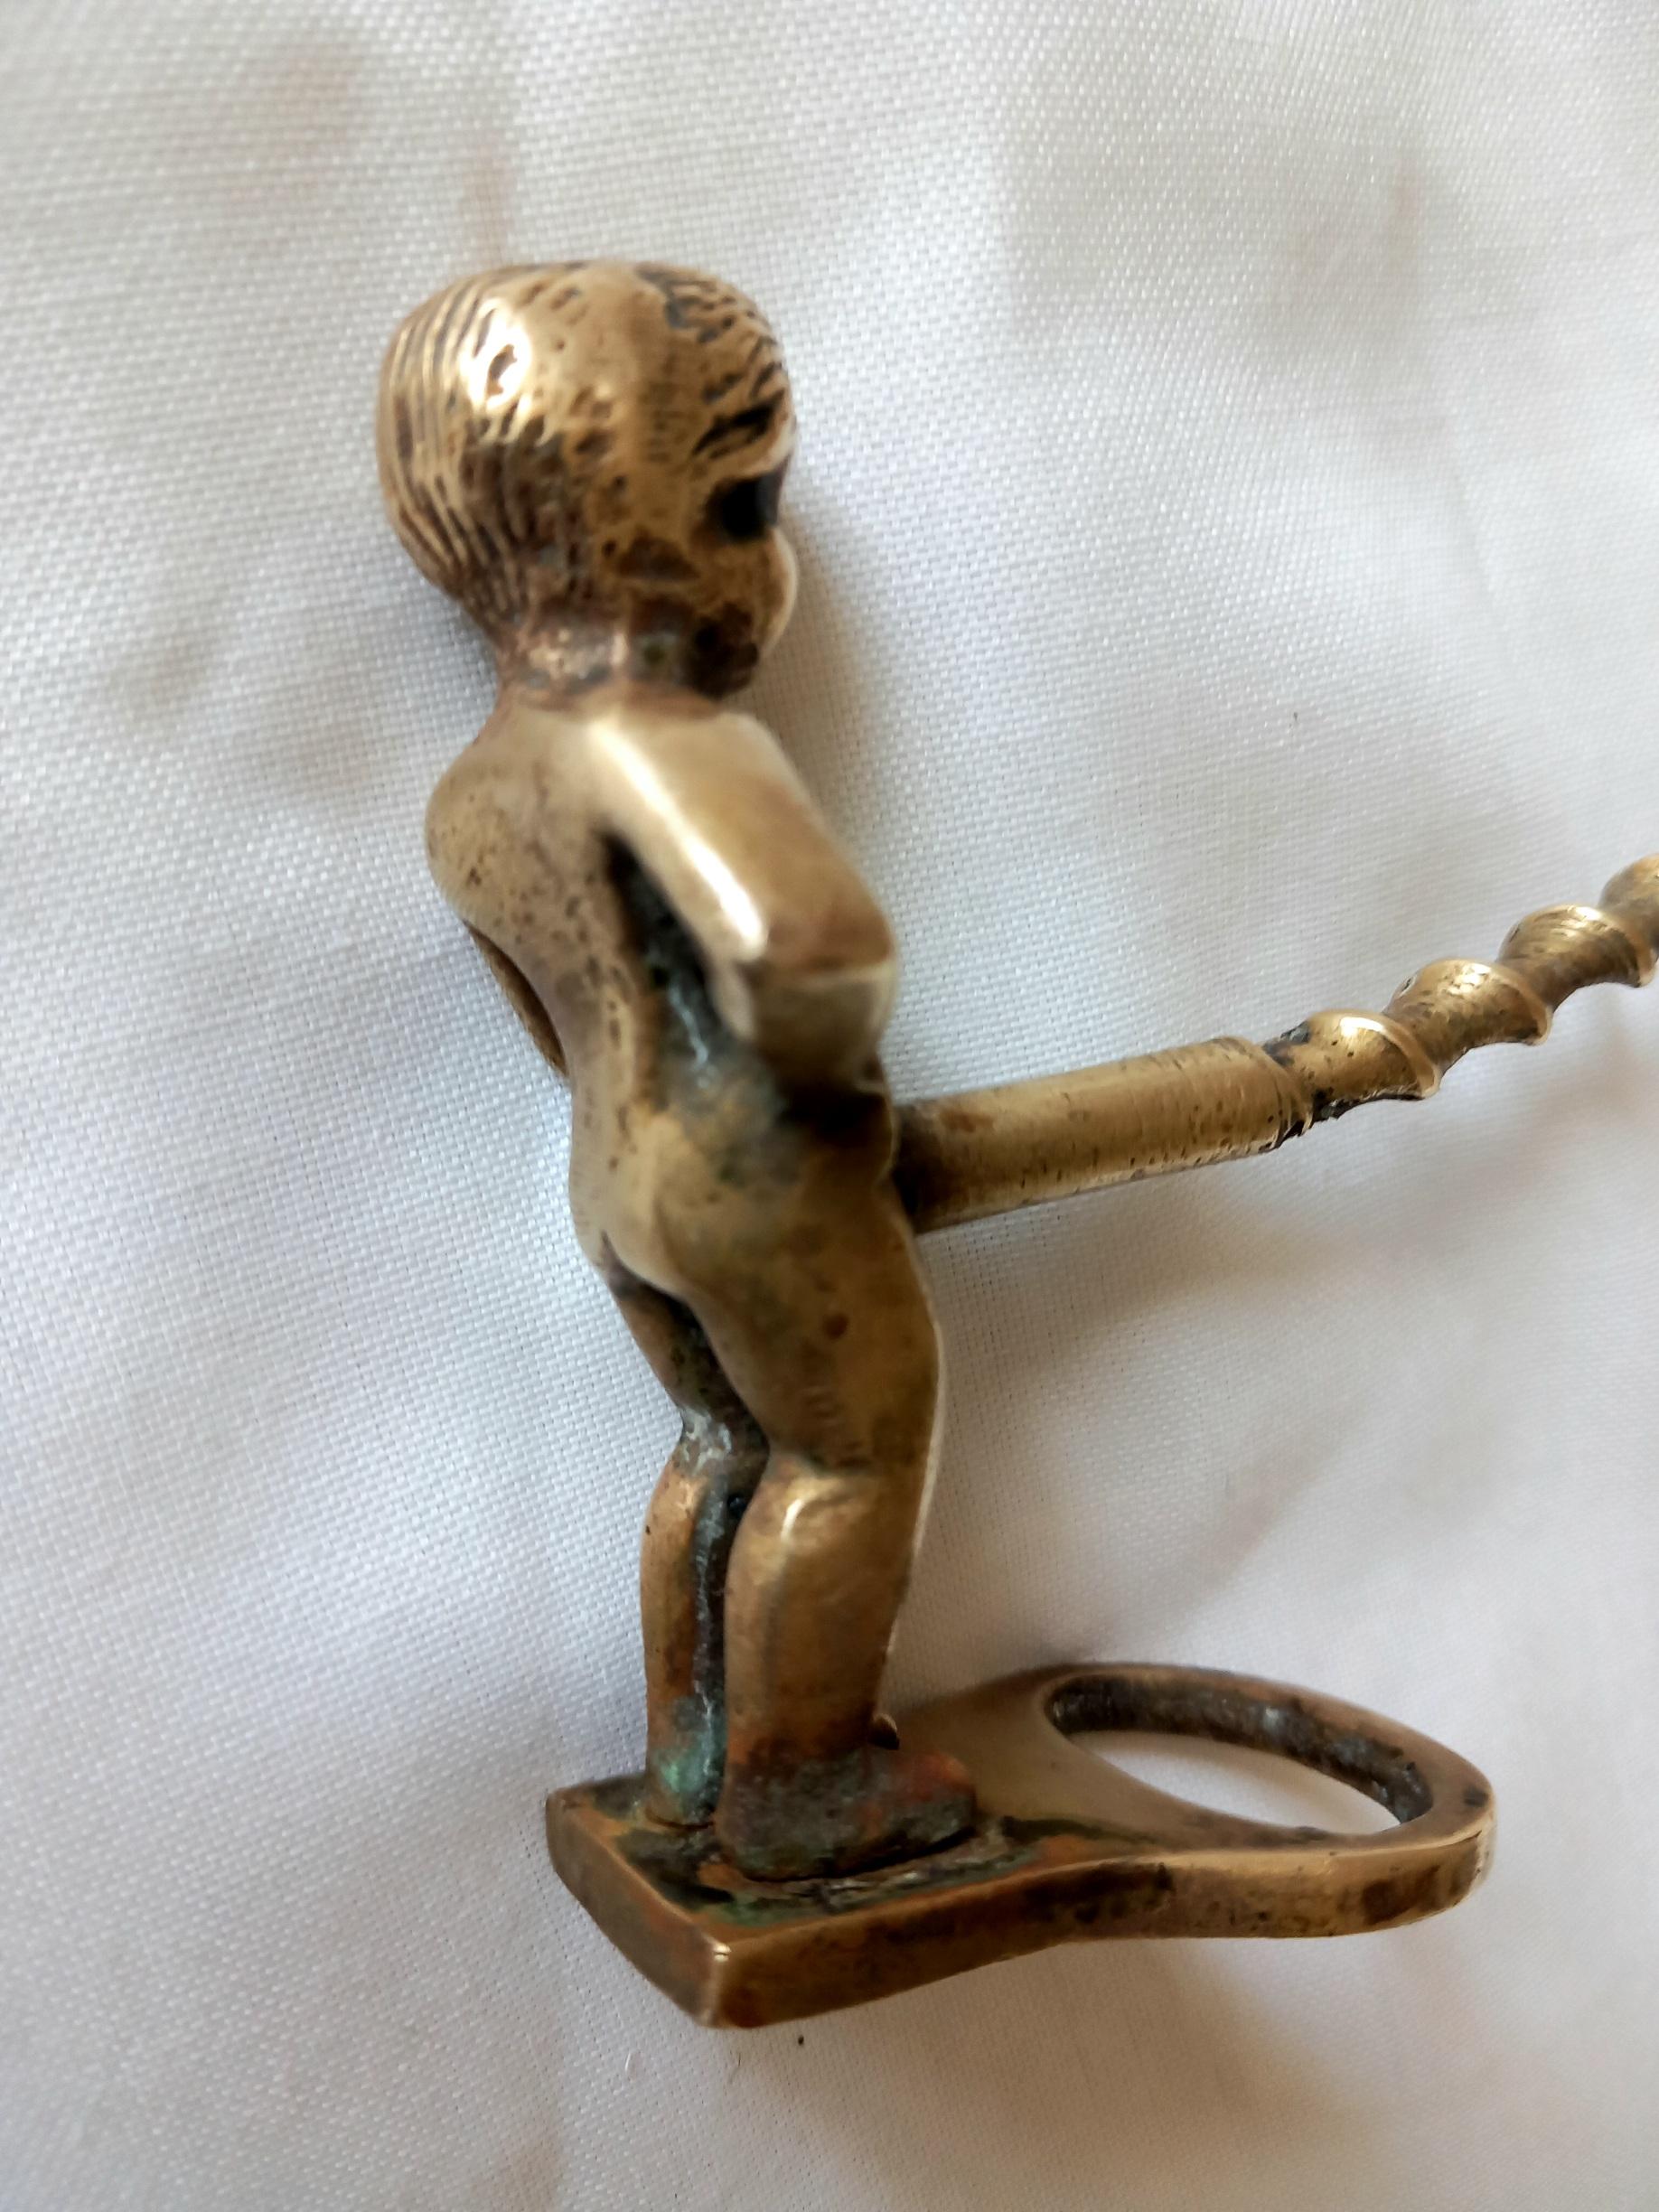 Usual cheap bottle opener for wine or beer in the form of a putto or cherub or a boy who urinates in the style of ¨ Manneken Pis ¨ from the historic center of Brussels, Belgium.
It is made of solid brass and in the front part it leads to the spiral